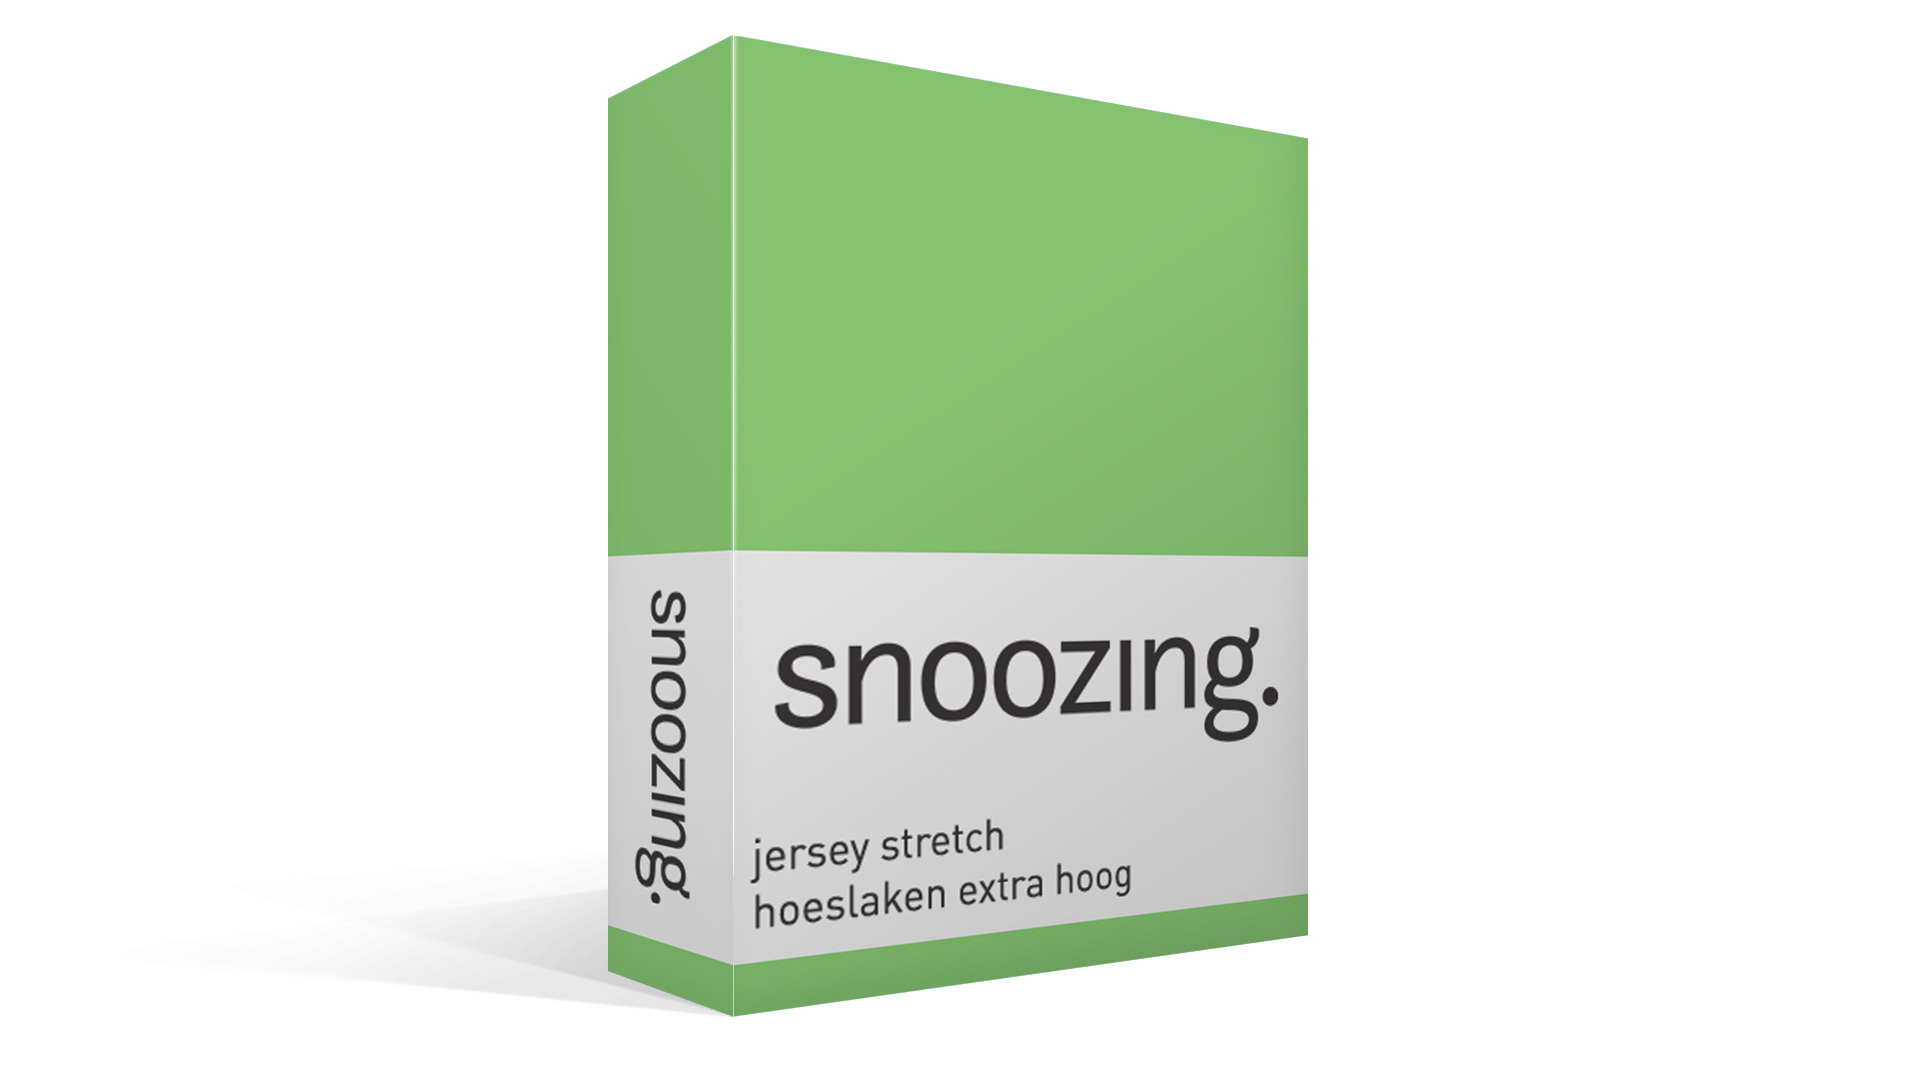 Snoozing jersey stretch hoeslaken extra hoog - lime